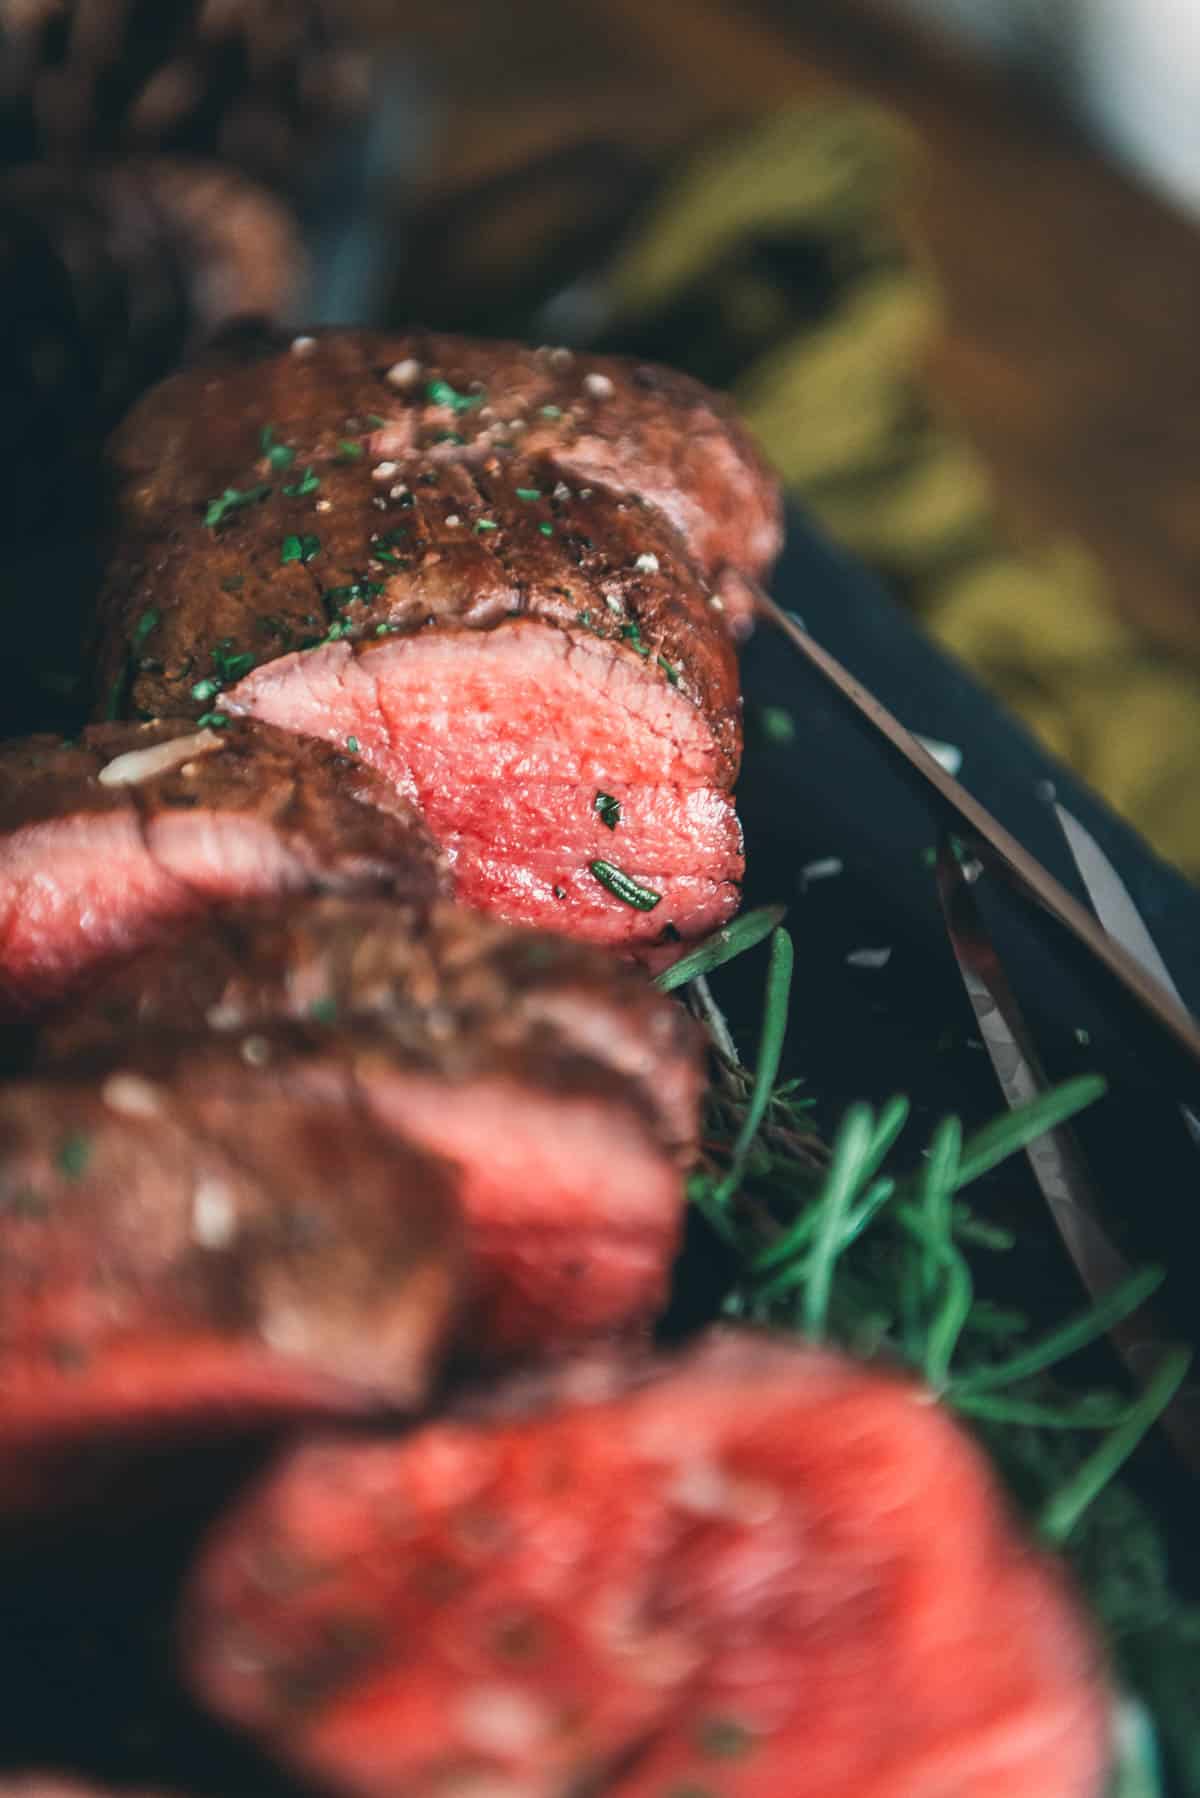 Sliced roast to show the exposed juicy tenderloin with a pink center.